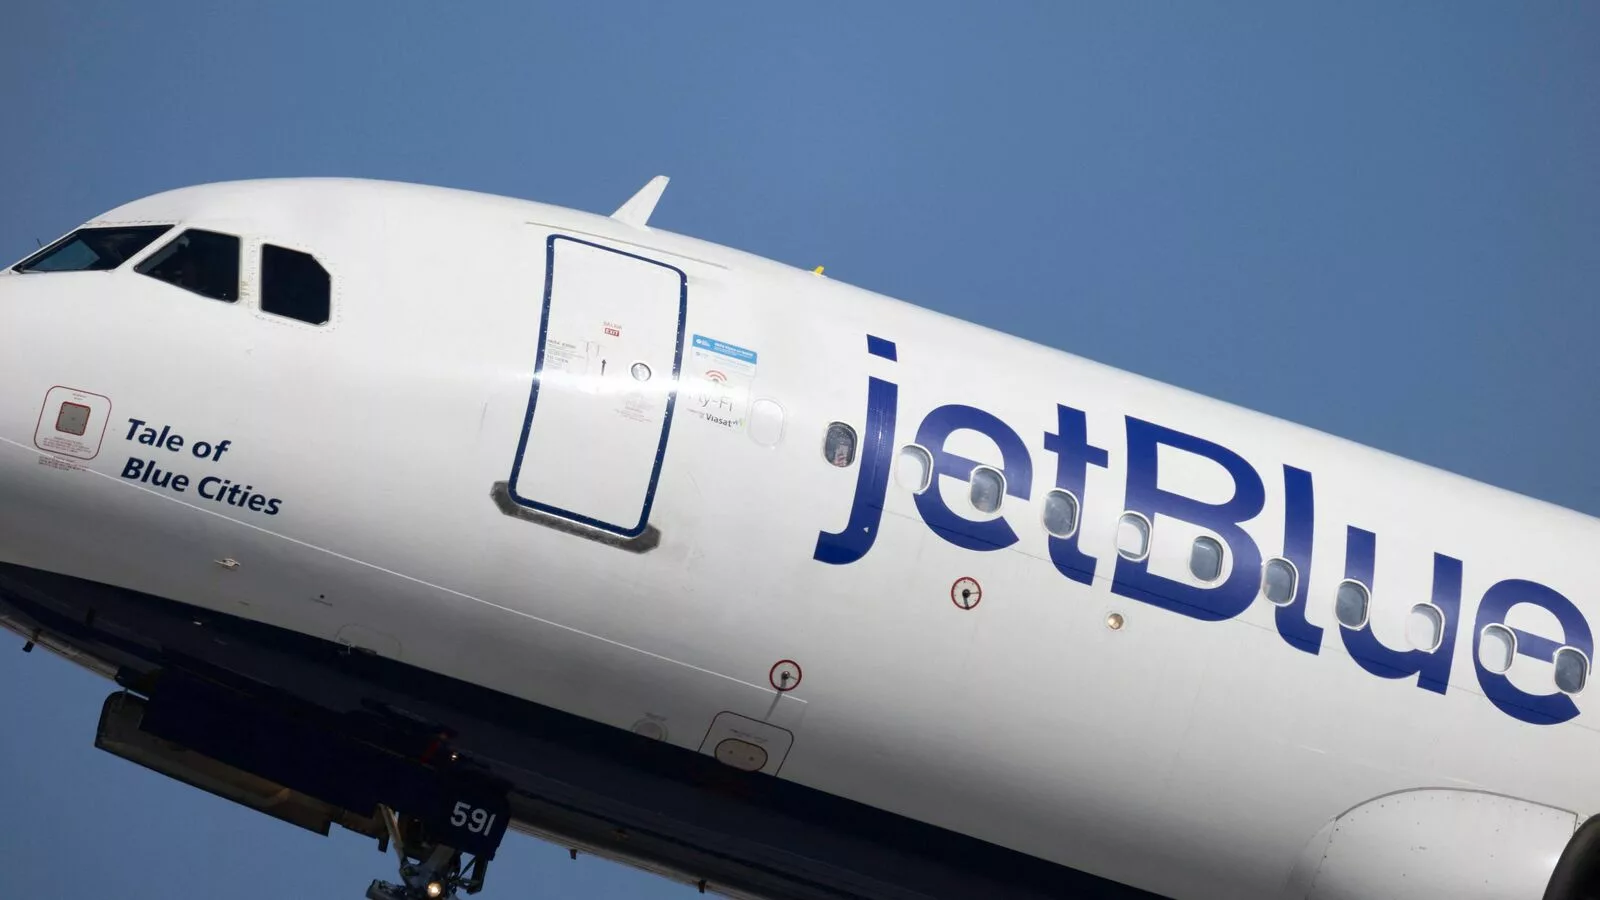 JetBlue Airways stock outperforms US markets, soars over 11% after Carl Icahn takes stake in airline